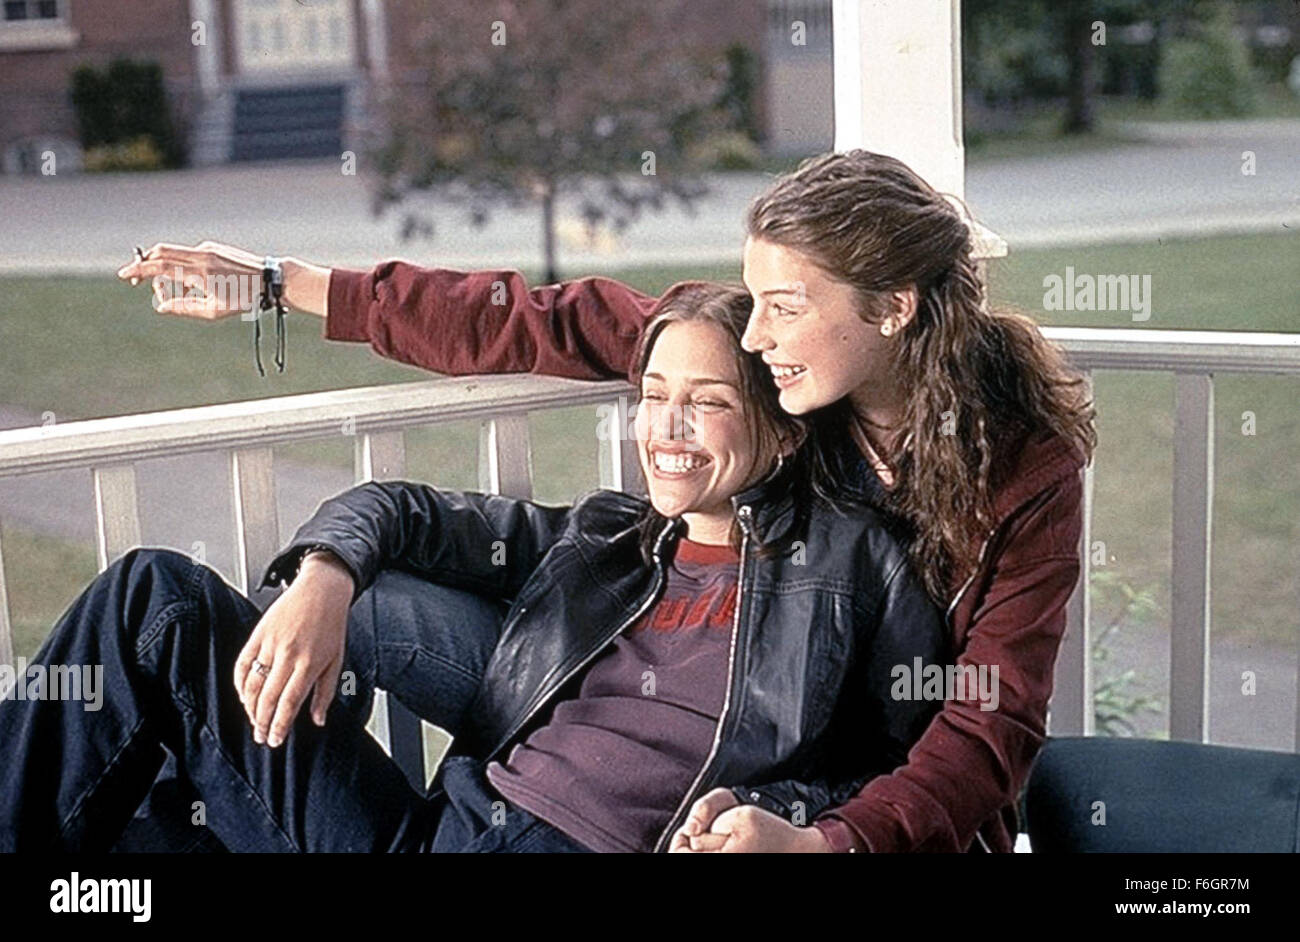 Jan 21, 2001; Lennoxville, Quebec, CANADA;  PIPER PERABO and JESSICA PARE star as Paulie Oster and Tori Moller in the drama/romance 'Lost and Delirious' directed by Lea Pool. Stock Photo